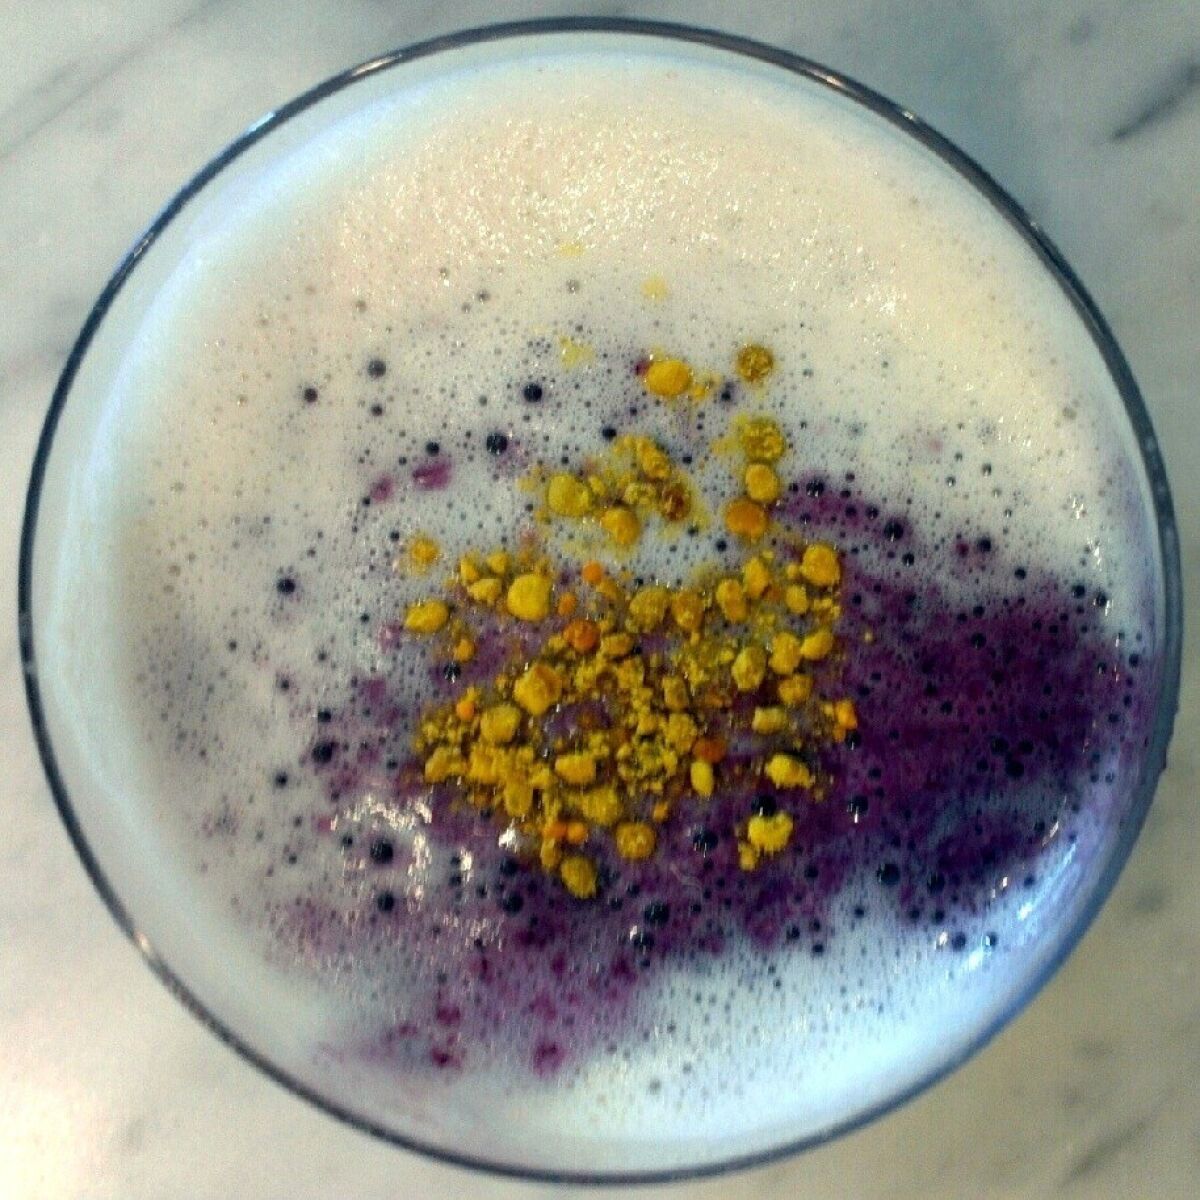 Make your own almond milk and a blueberry-bee-pollen smoothie.